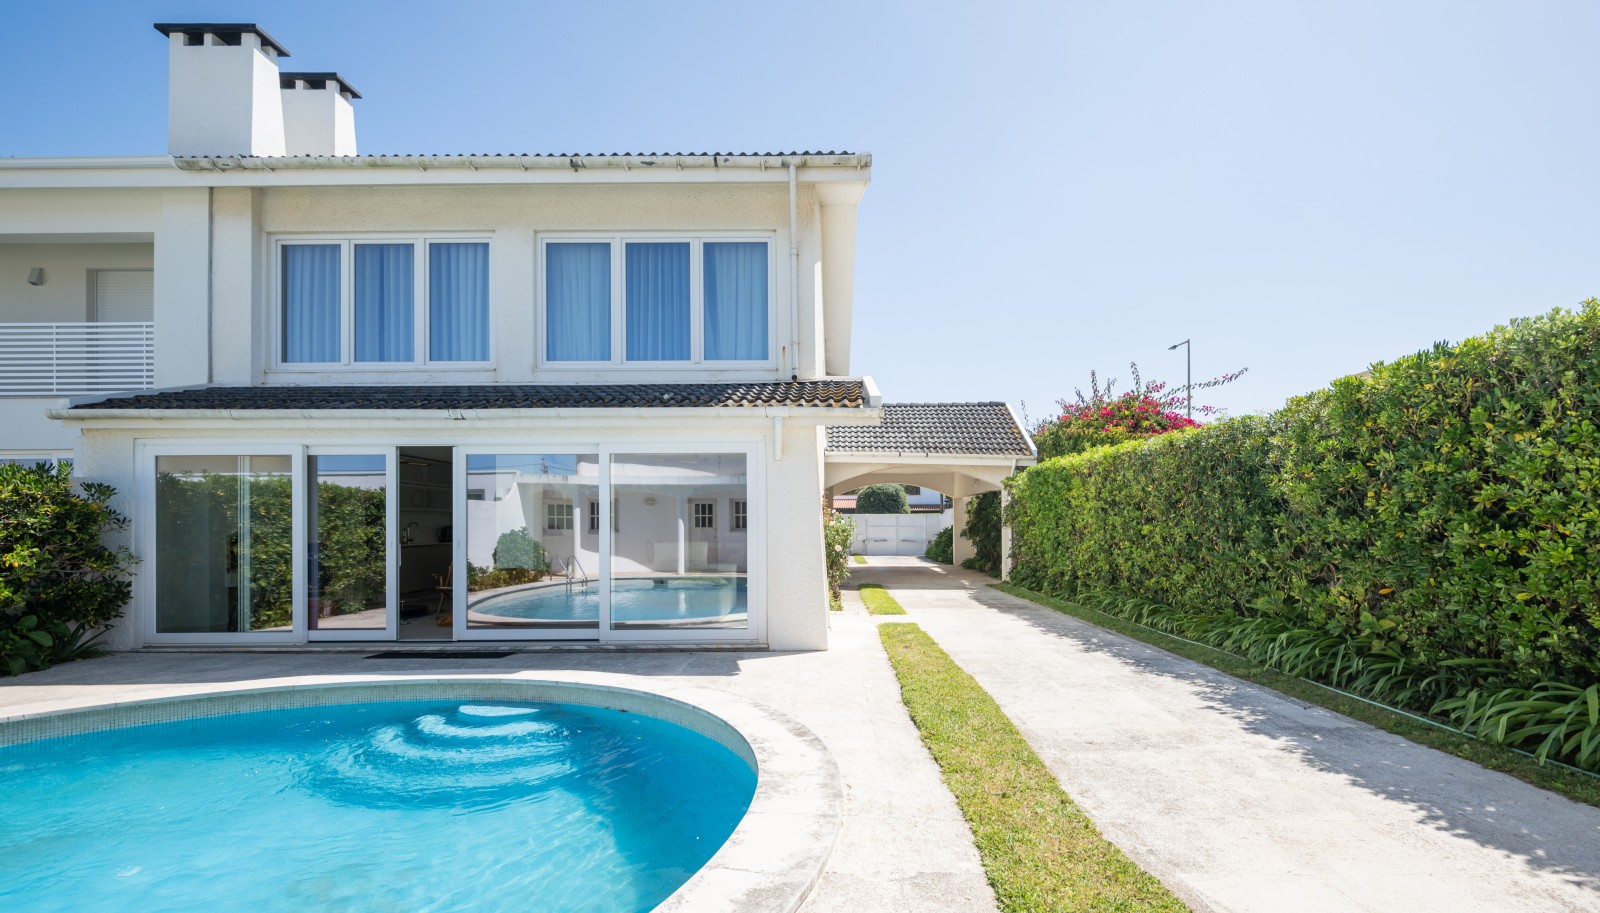 Sale: 3-bedroom villa with pool, on the 2nd line of the sea, in Miramar, V. N. Gaia, Portugal_235237